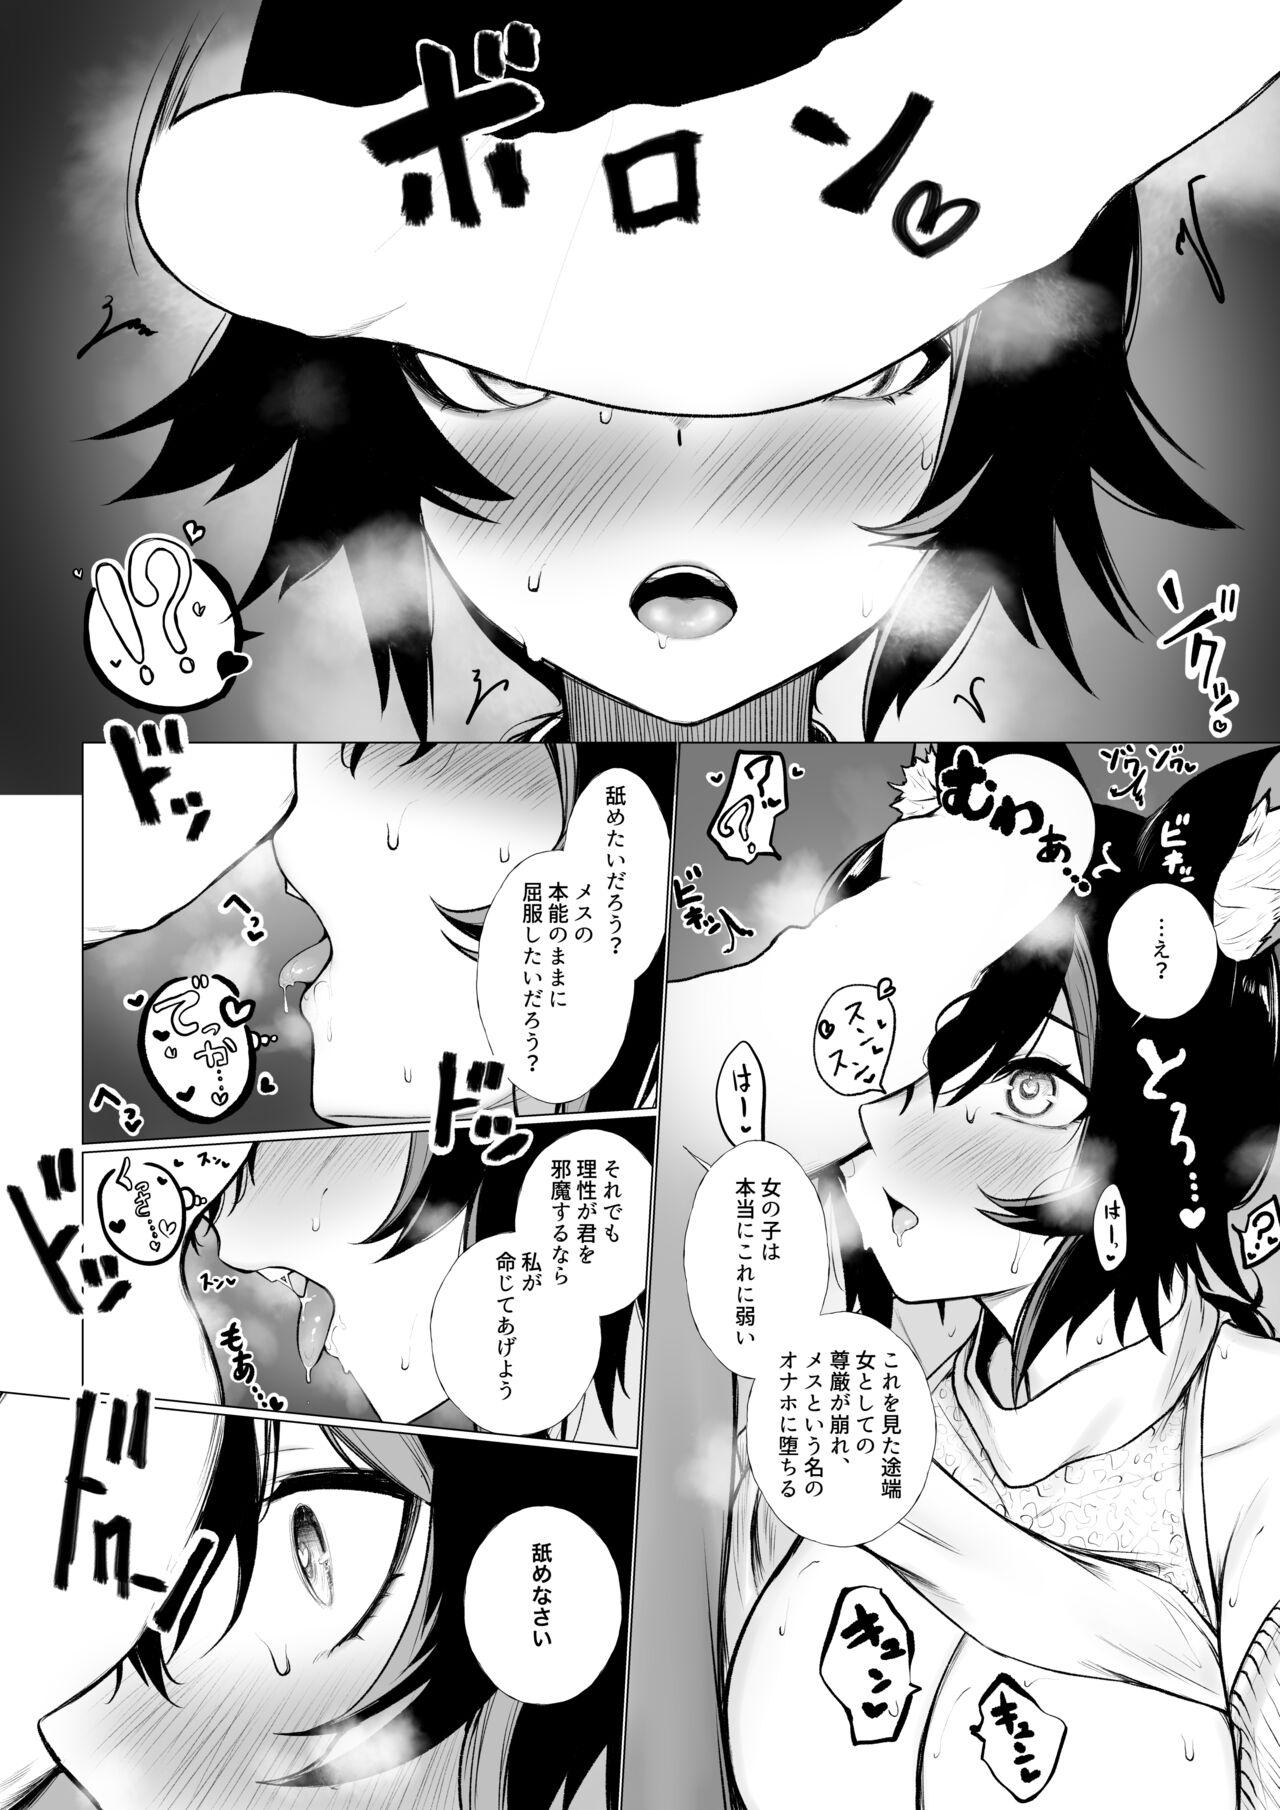 Peludo 女にされちゃうmo - Hololive Longhair - Page 4